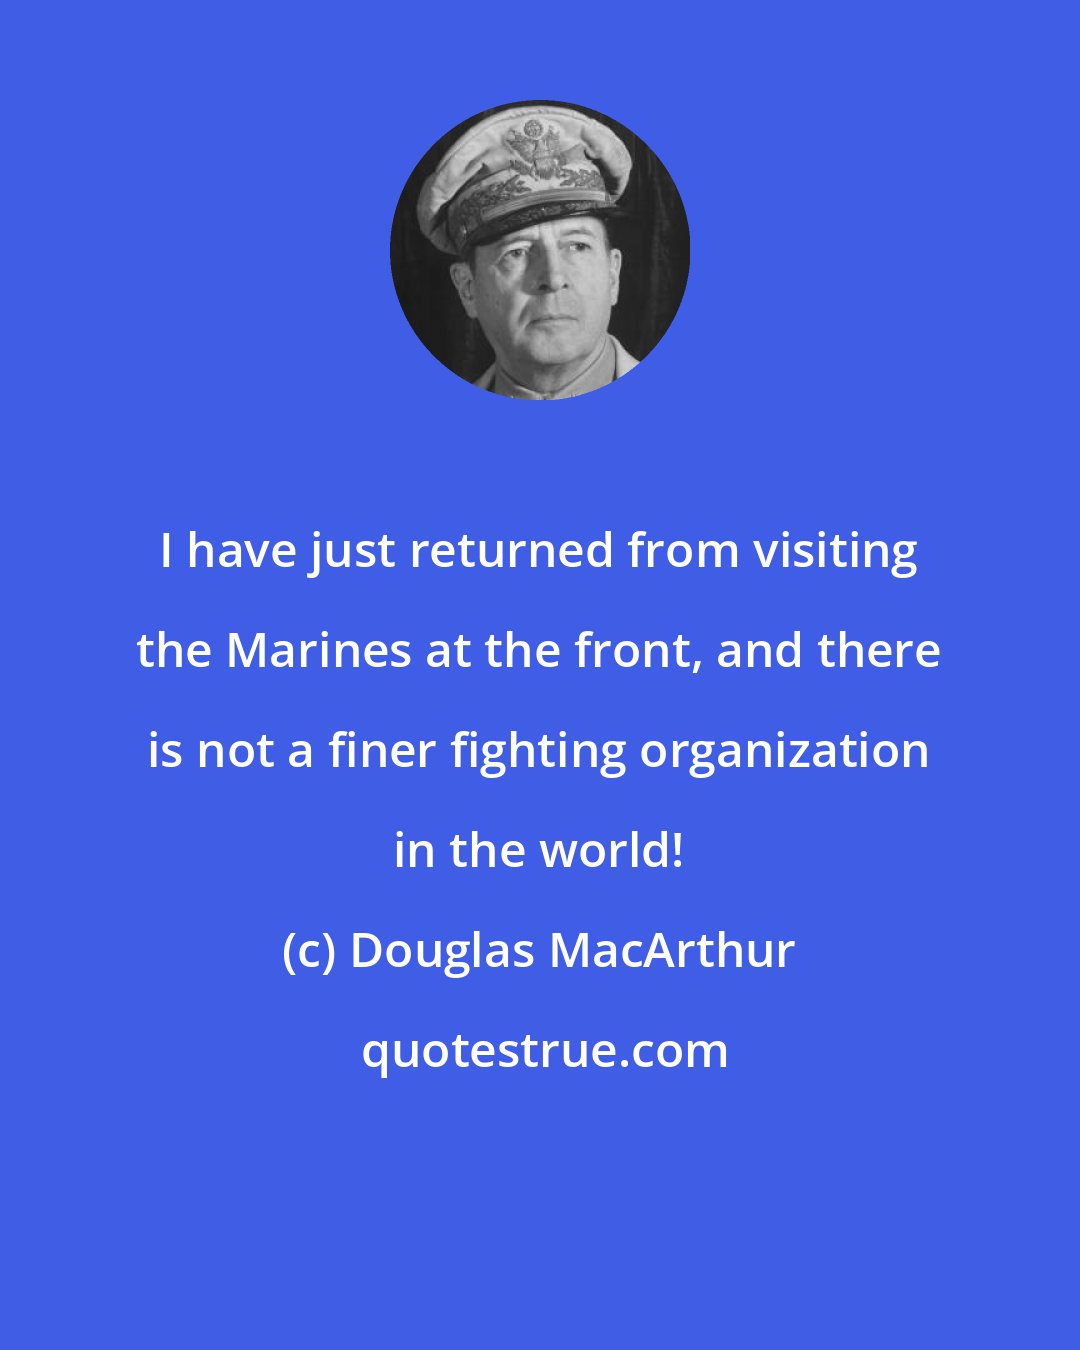 Douglas MacArthur: I have just returned from visiting the Marines at the front, and there is not a finer fighting organization in the world!